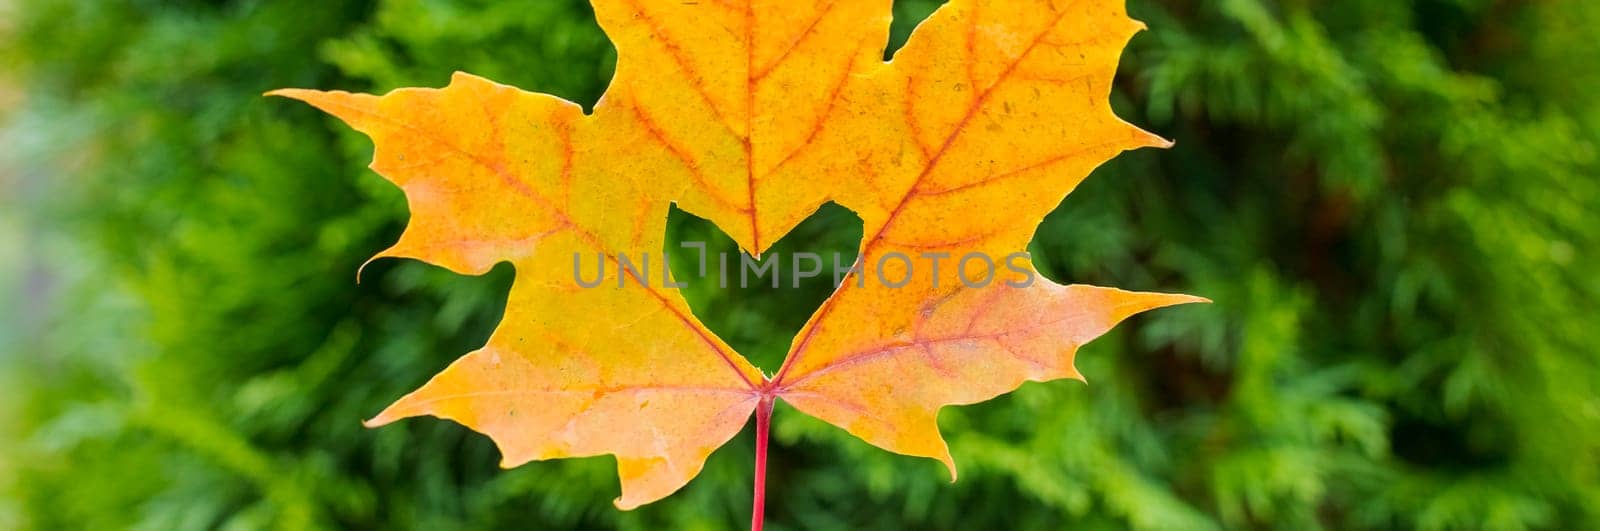 A heart in an autumn leaf on a background of grained wood and lawn. autumn orange leaf with a carved heart .Concept of love for travel or early autumn.Fall time season.web banner by YuliaYaspe1979